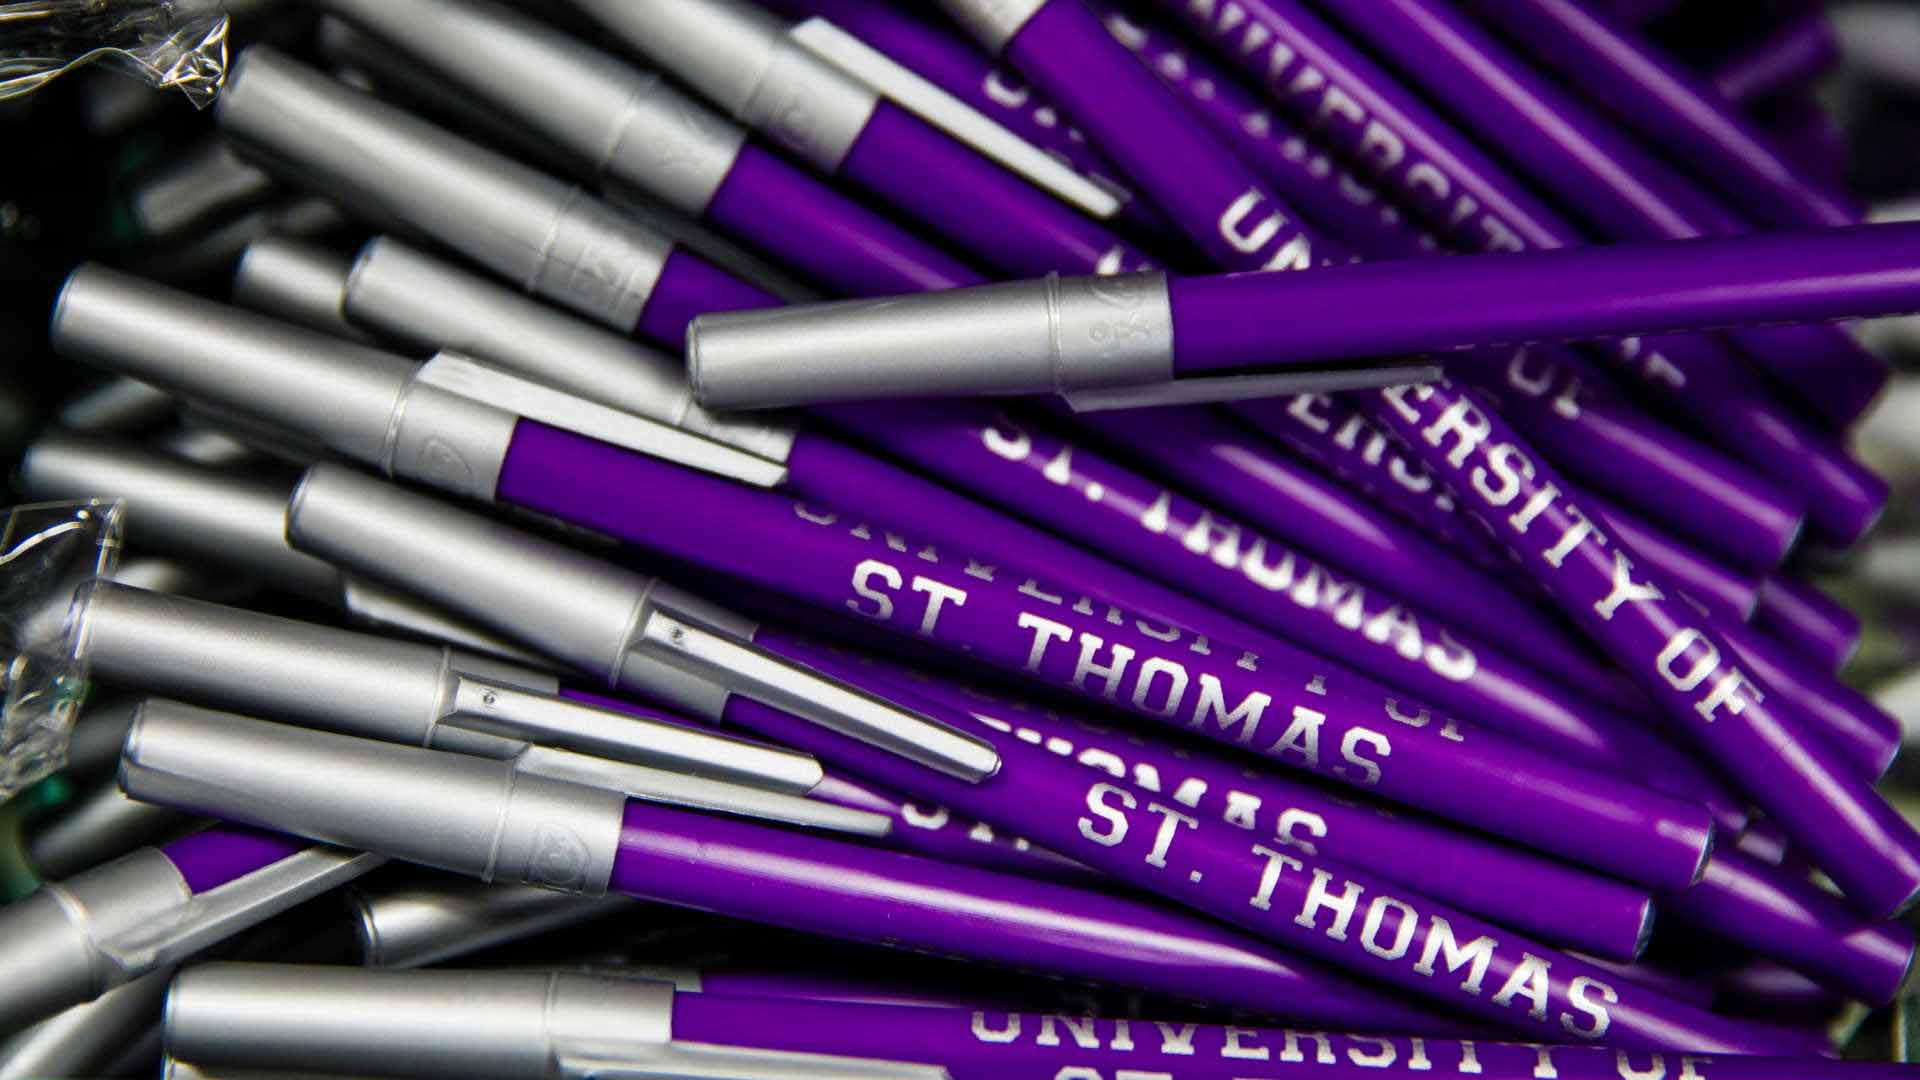 purple colored pens that say University of St. Thomas